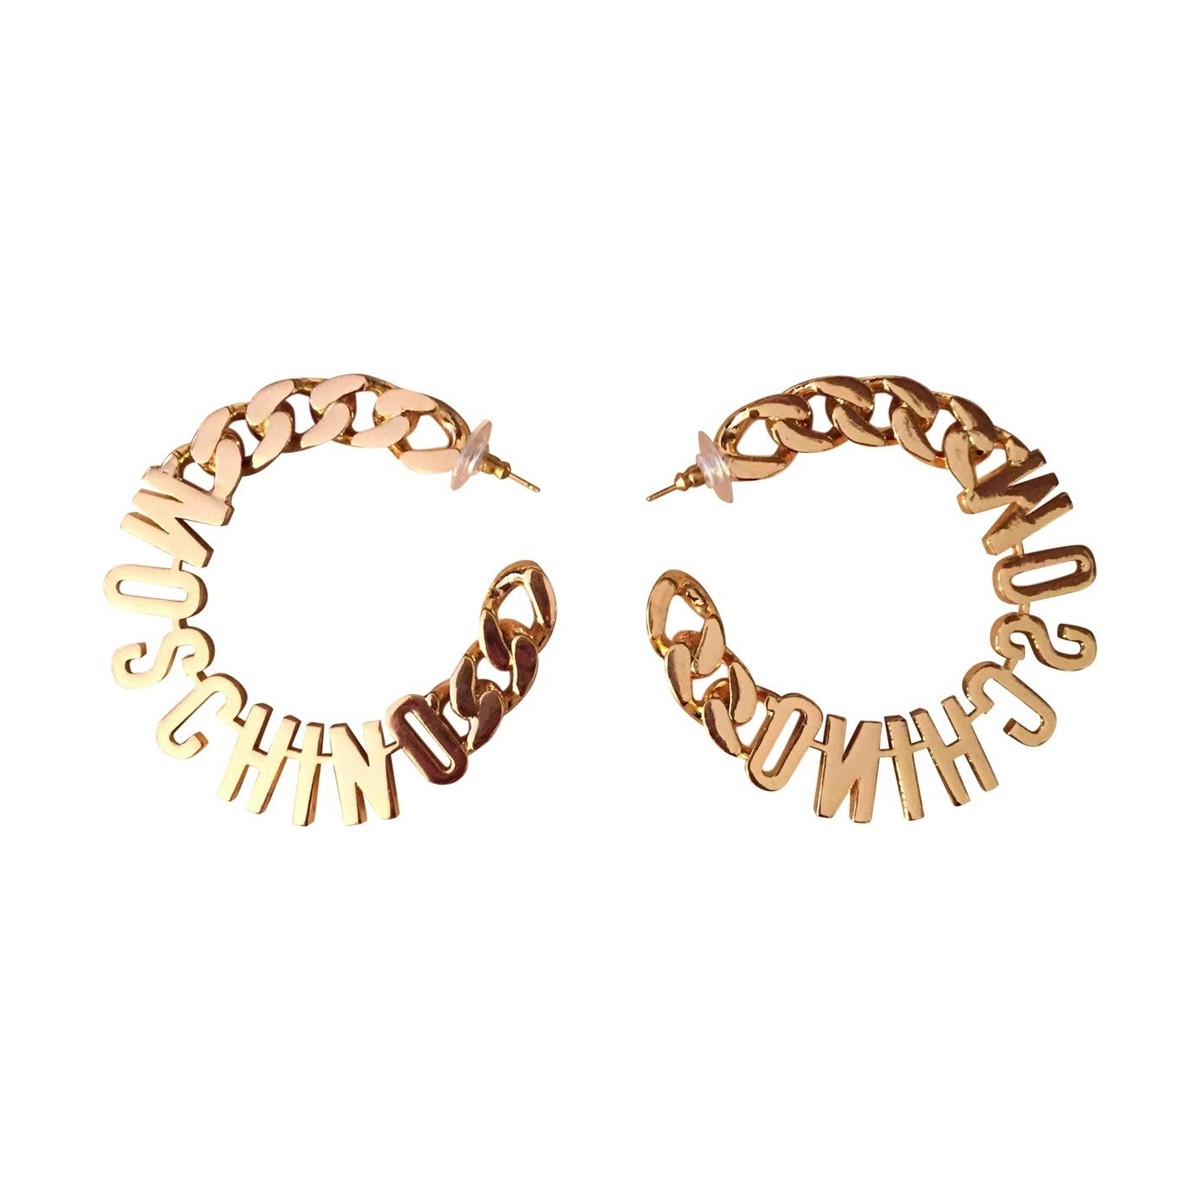 MOSCHINO for H&M current season earrings | My good closet